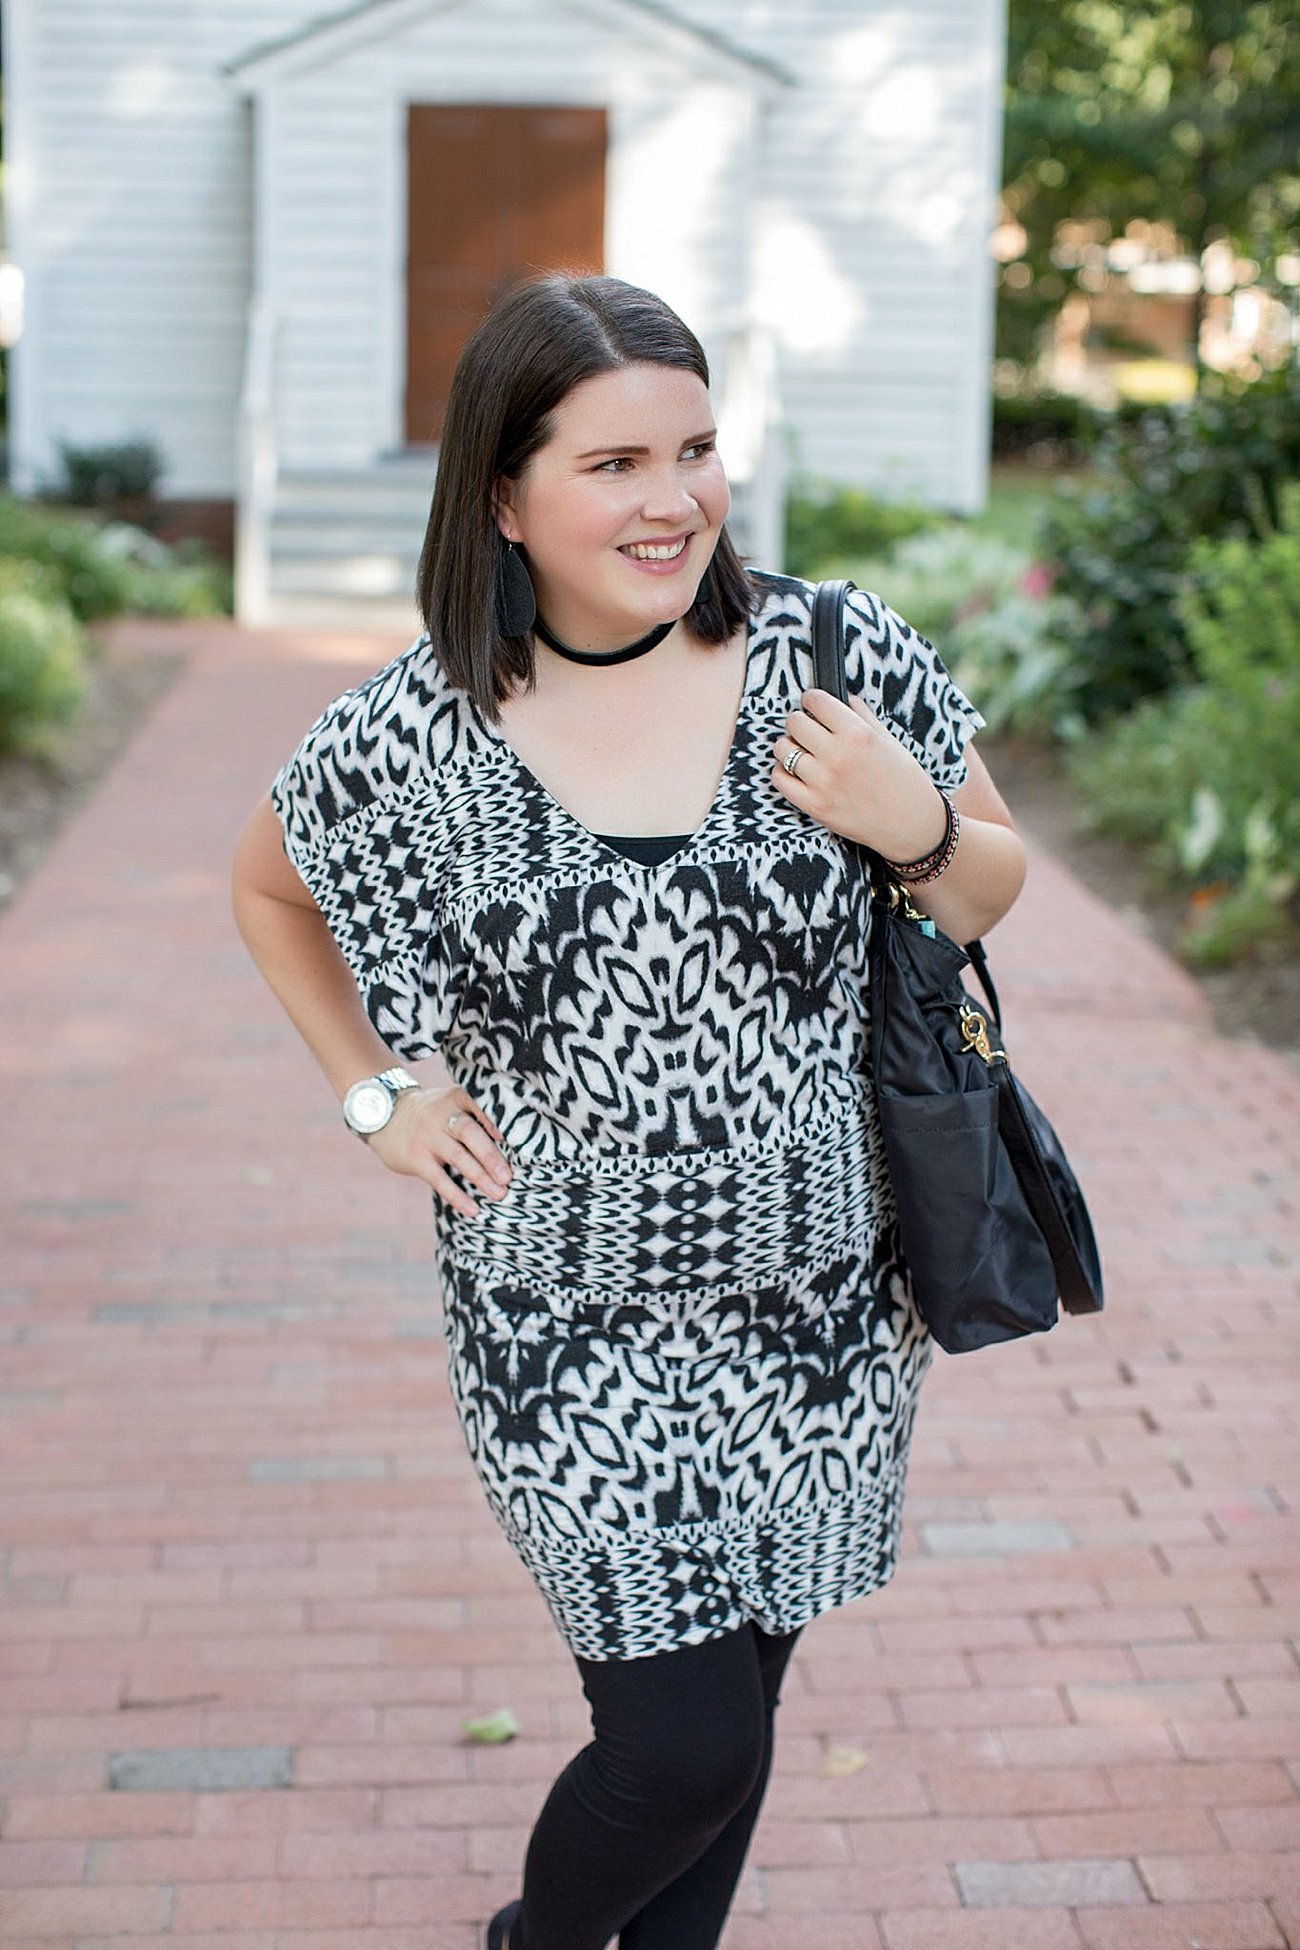 Threads for Thought "Mia Dress", LulaRoe black leggings, Lily Jade diaper bag, Nickel & Suede choker, Nickel & Suede earrings, Darzah stitched leather cuff | ethical fashion blogger, north carolina fashion blogger (4)